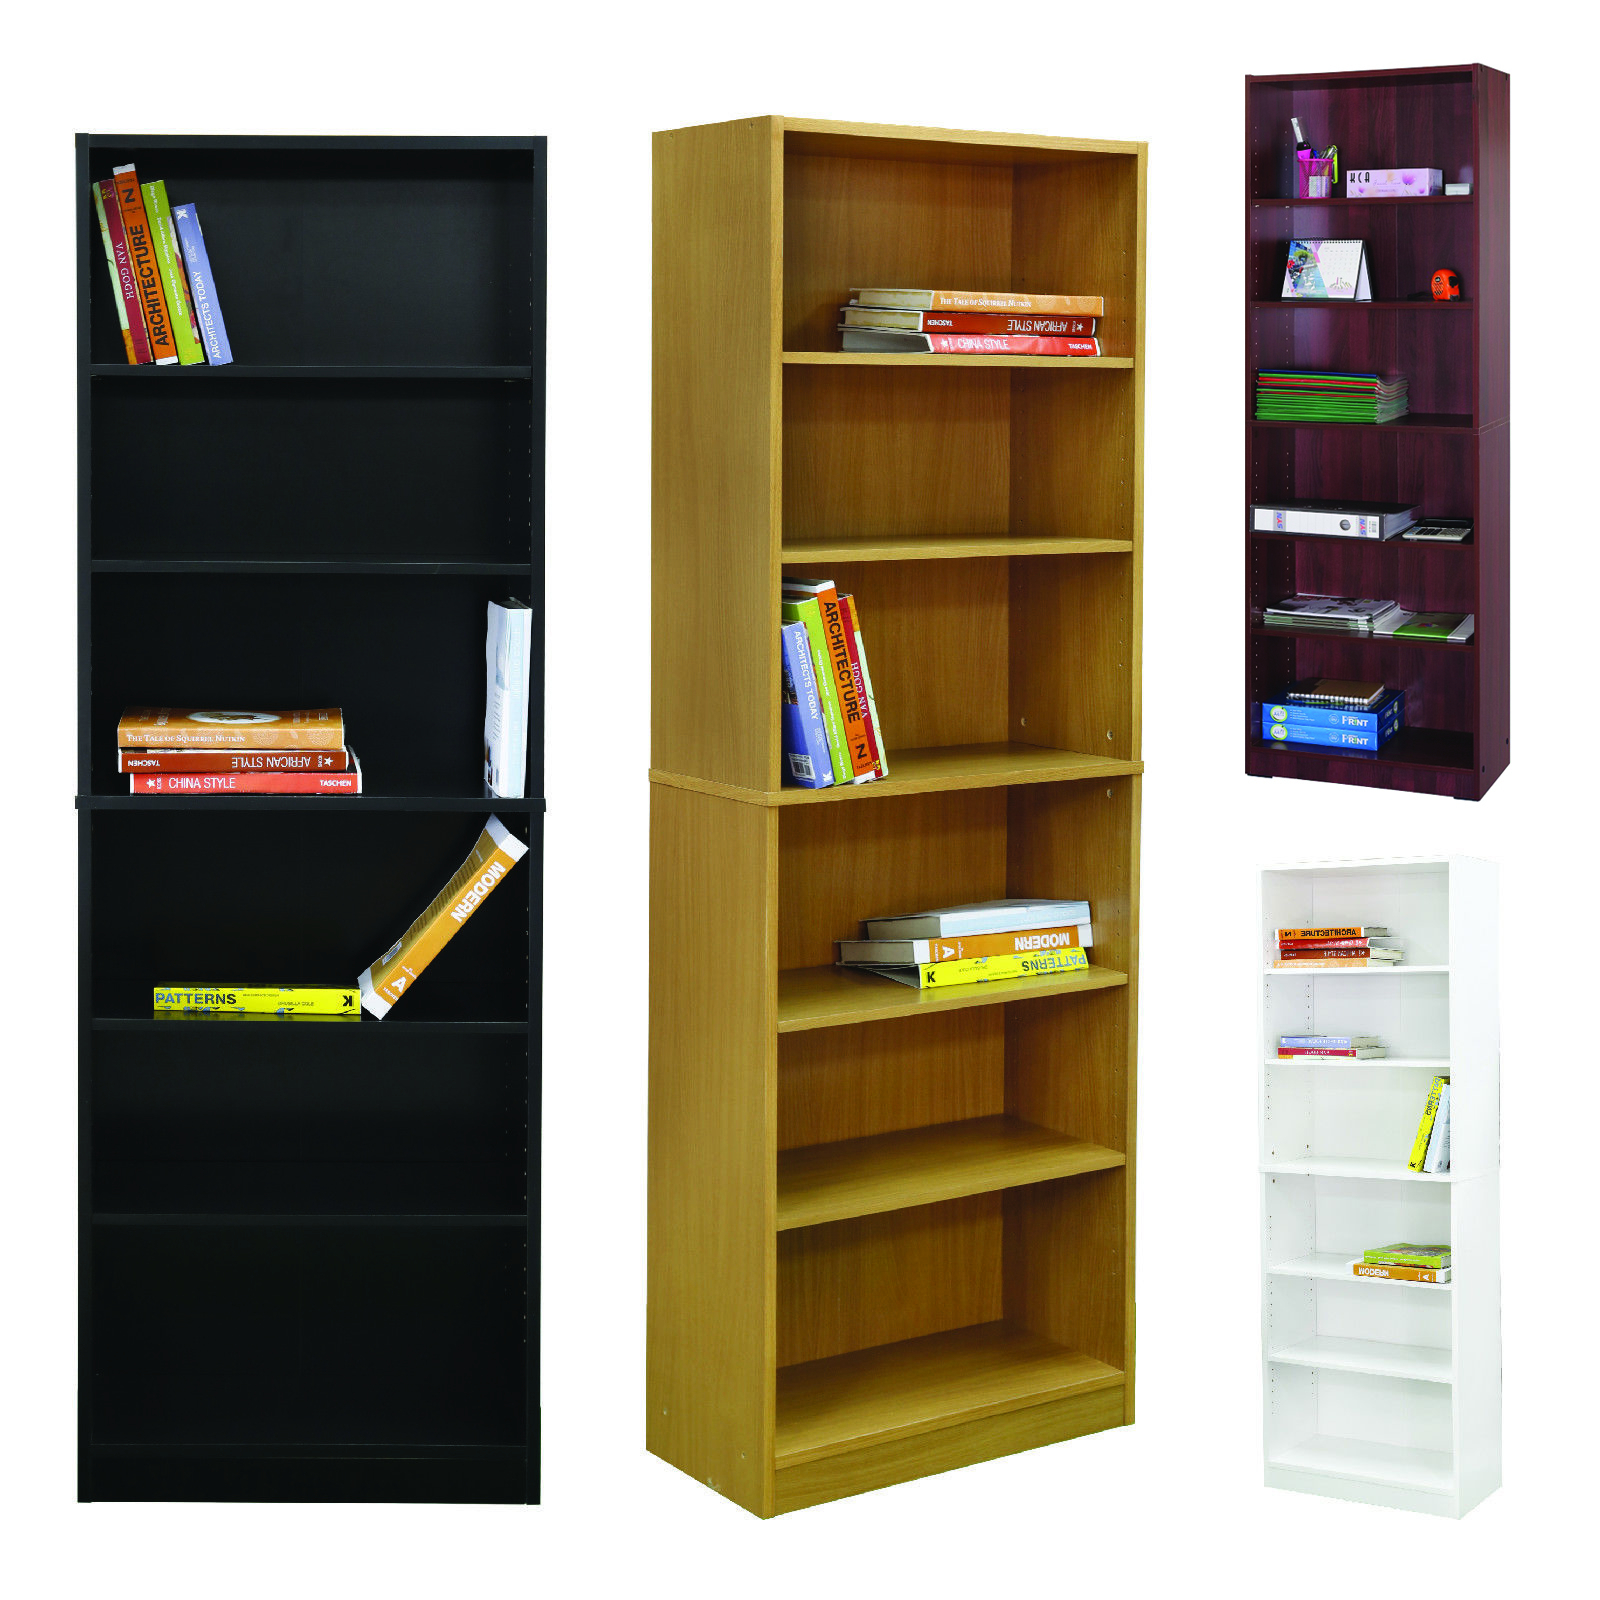 Details About Tall Bookcase Unit Display Storage Wooden Bookshelf Home Office 6tier Adjustable with regard to proportions 1600 X 1600